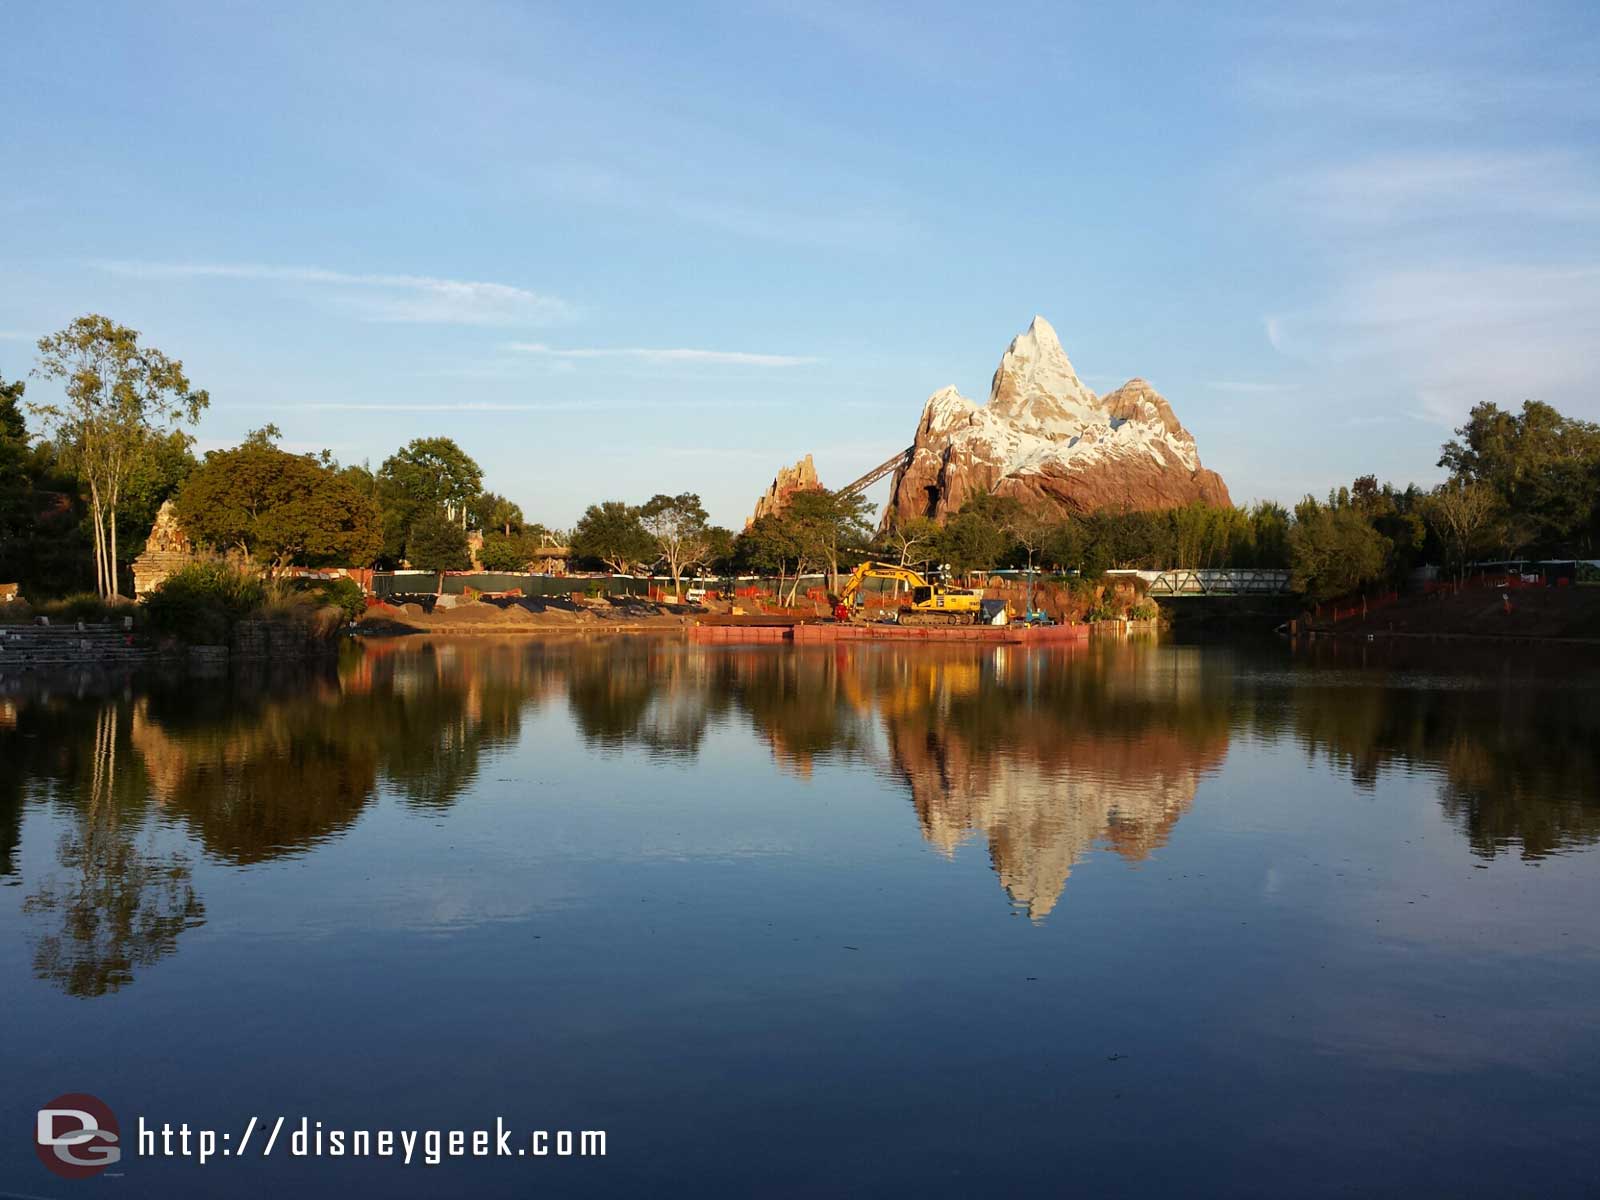 Expedition Everest from across the lagoon.